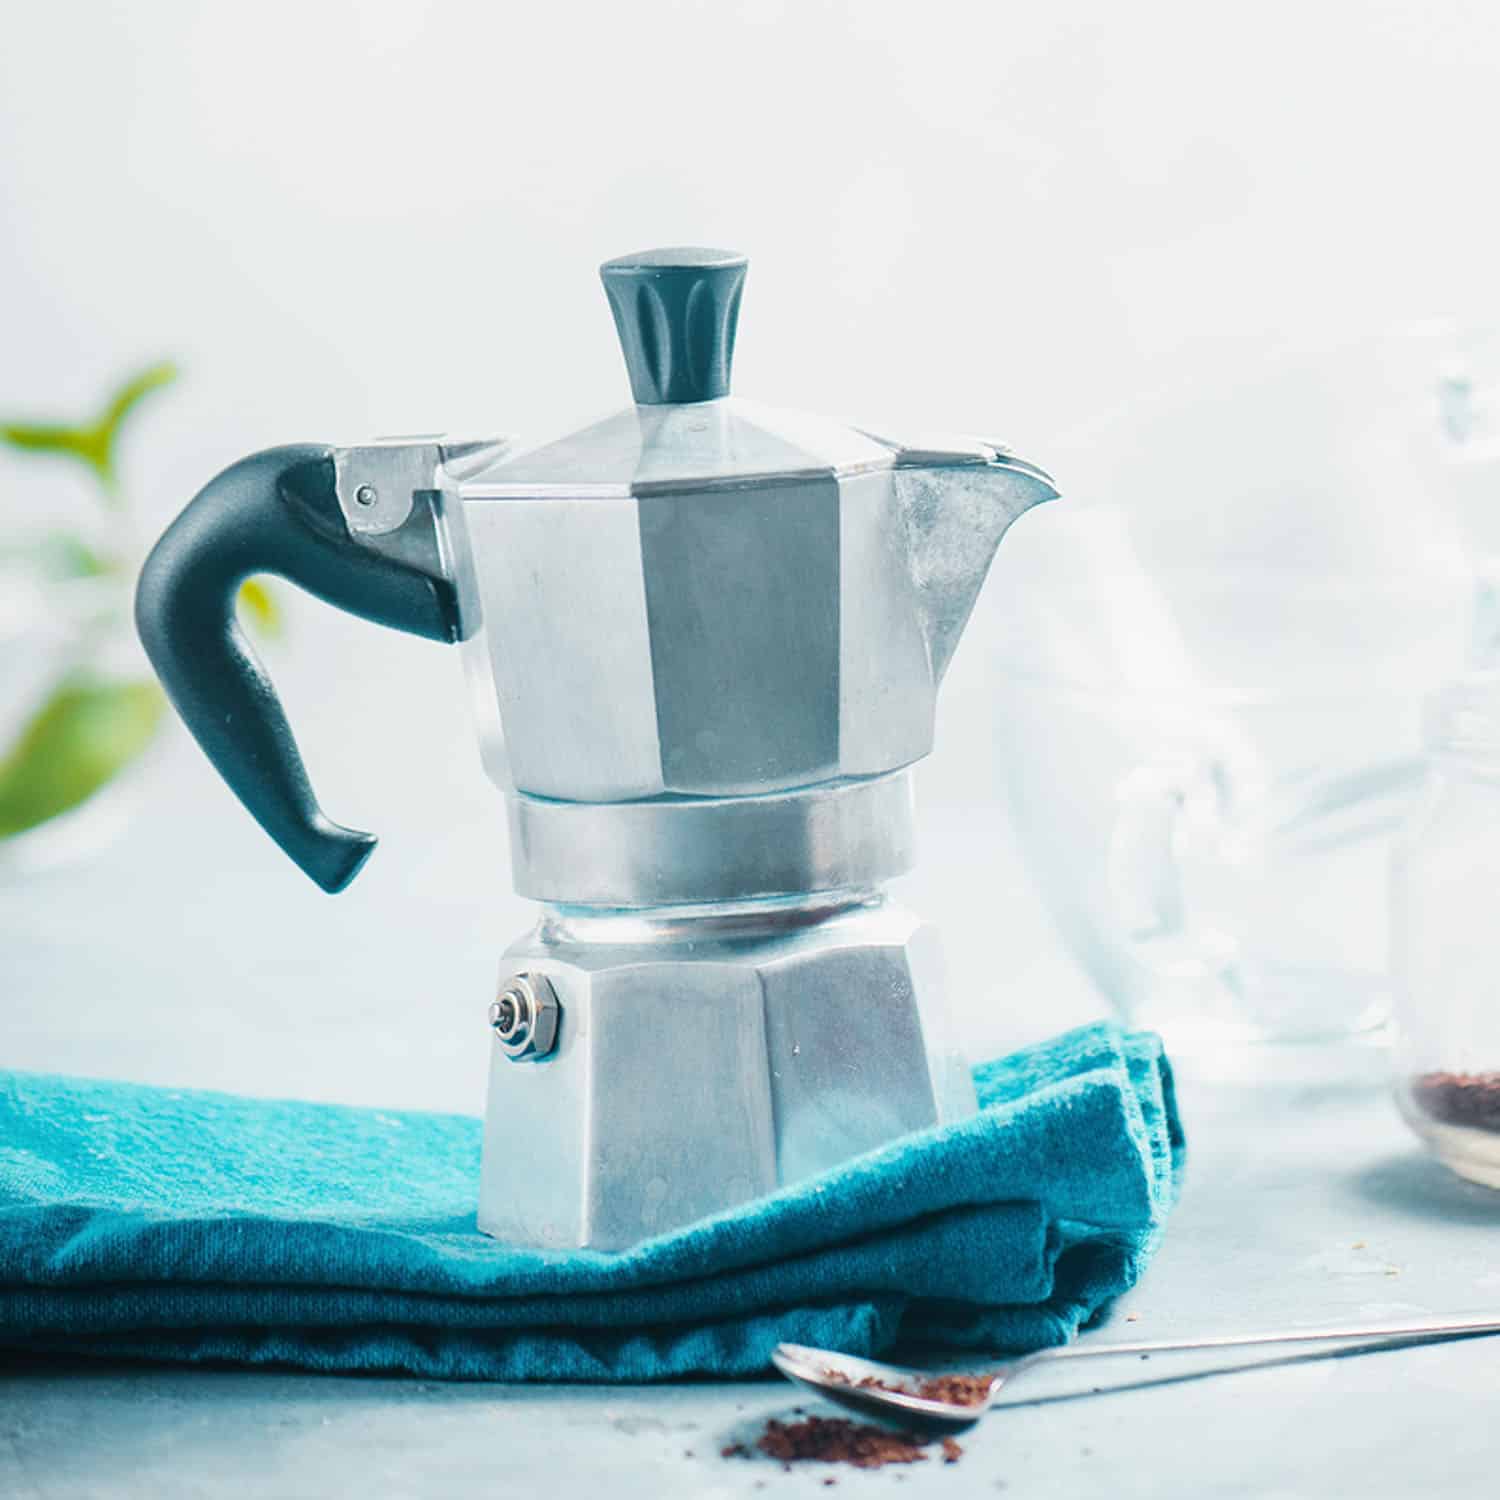 START YOUR SLOW BAR CAFE WITH MOKA POTS: RECIPES FOR CLASSIC HOT